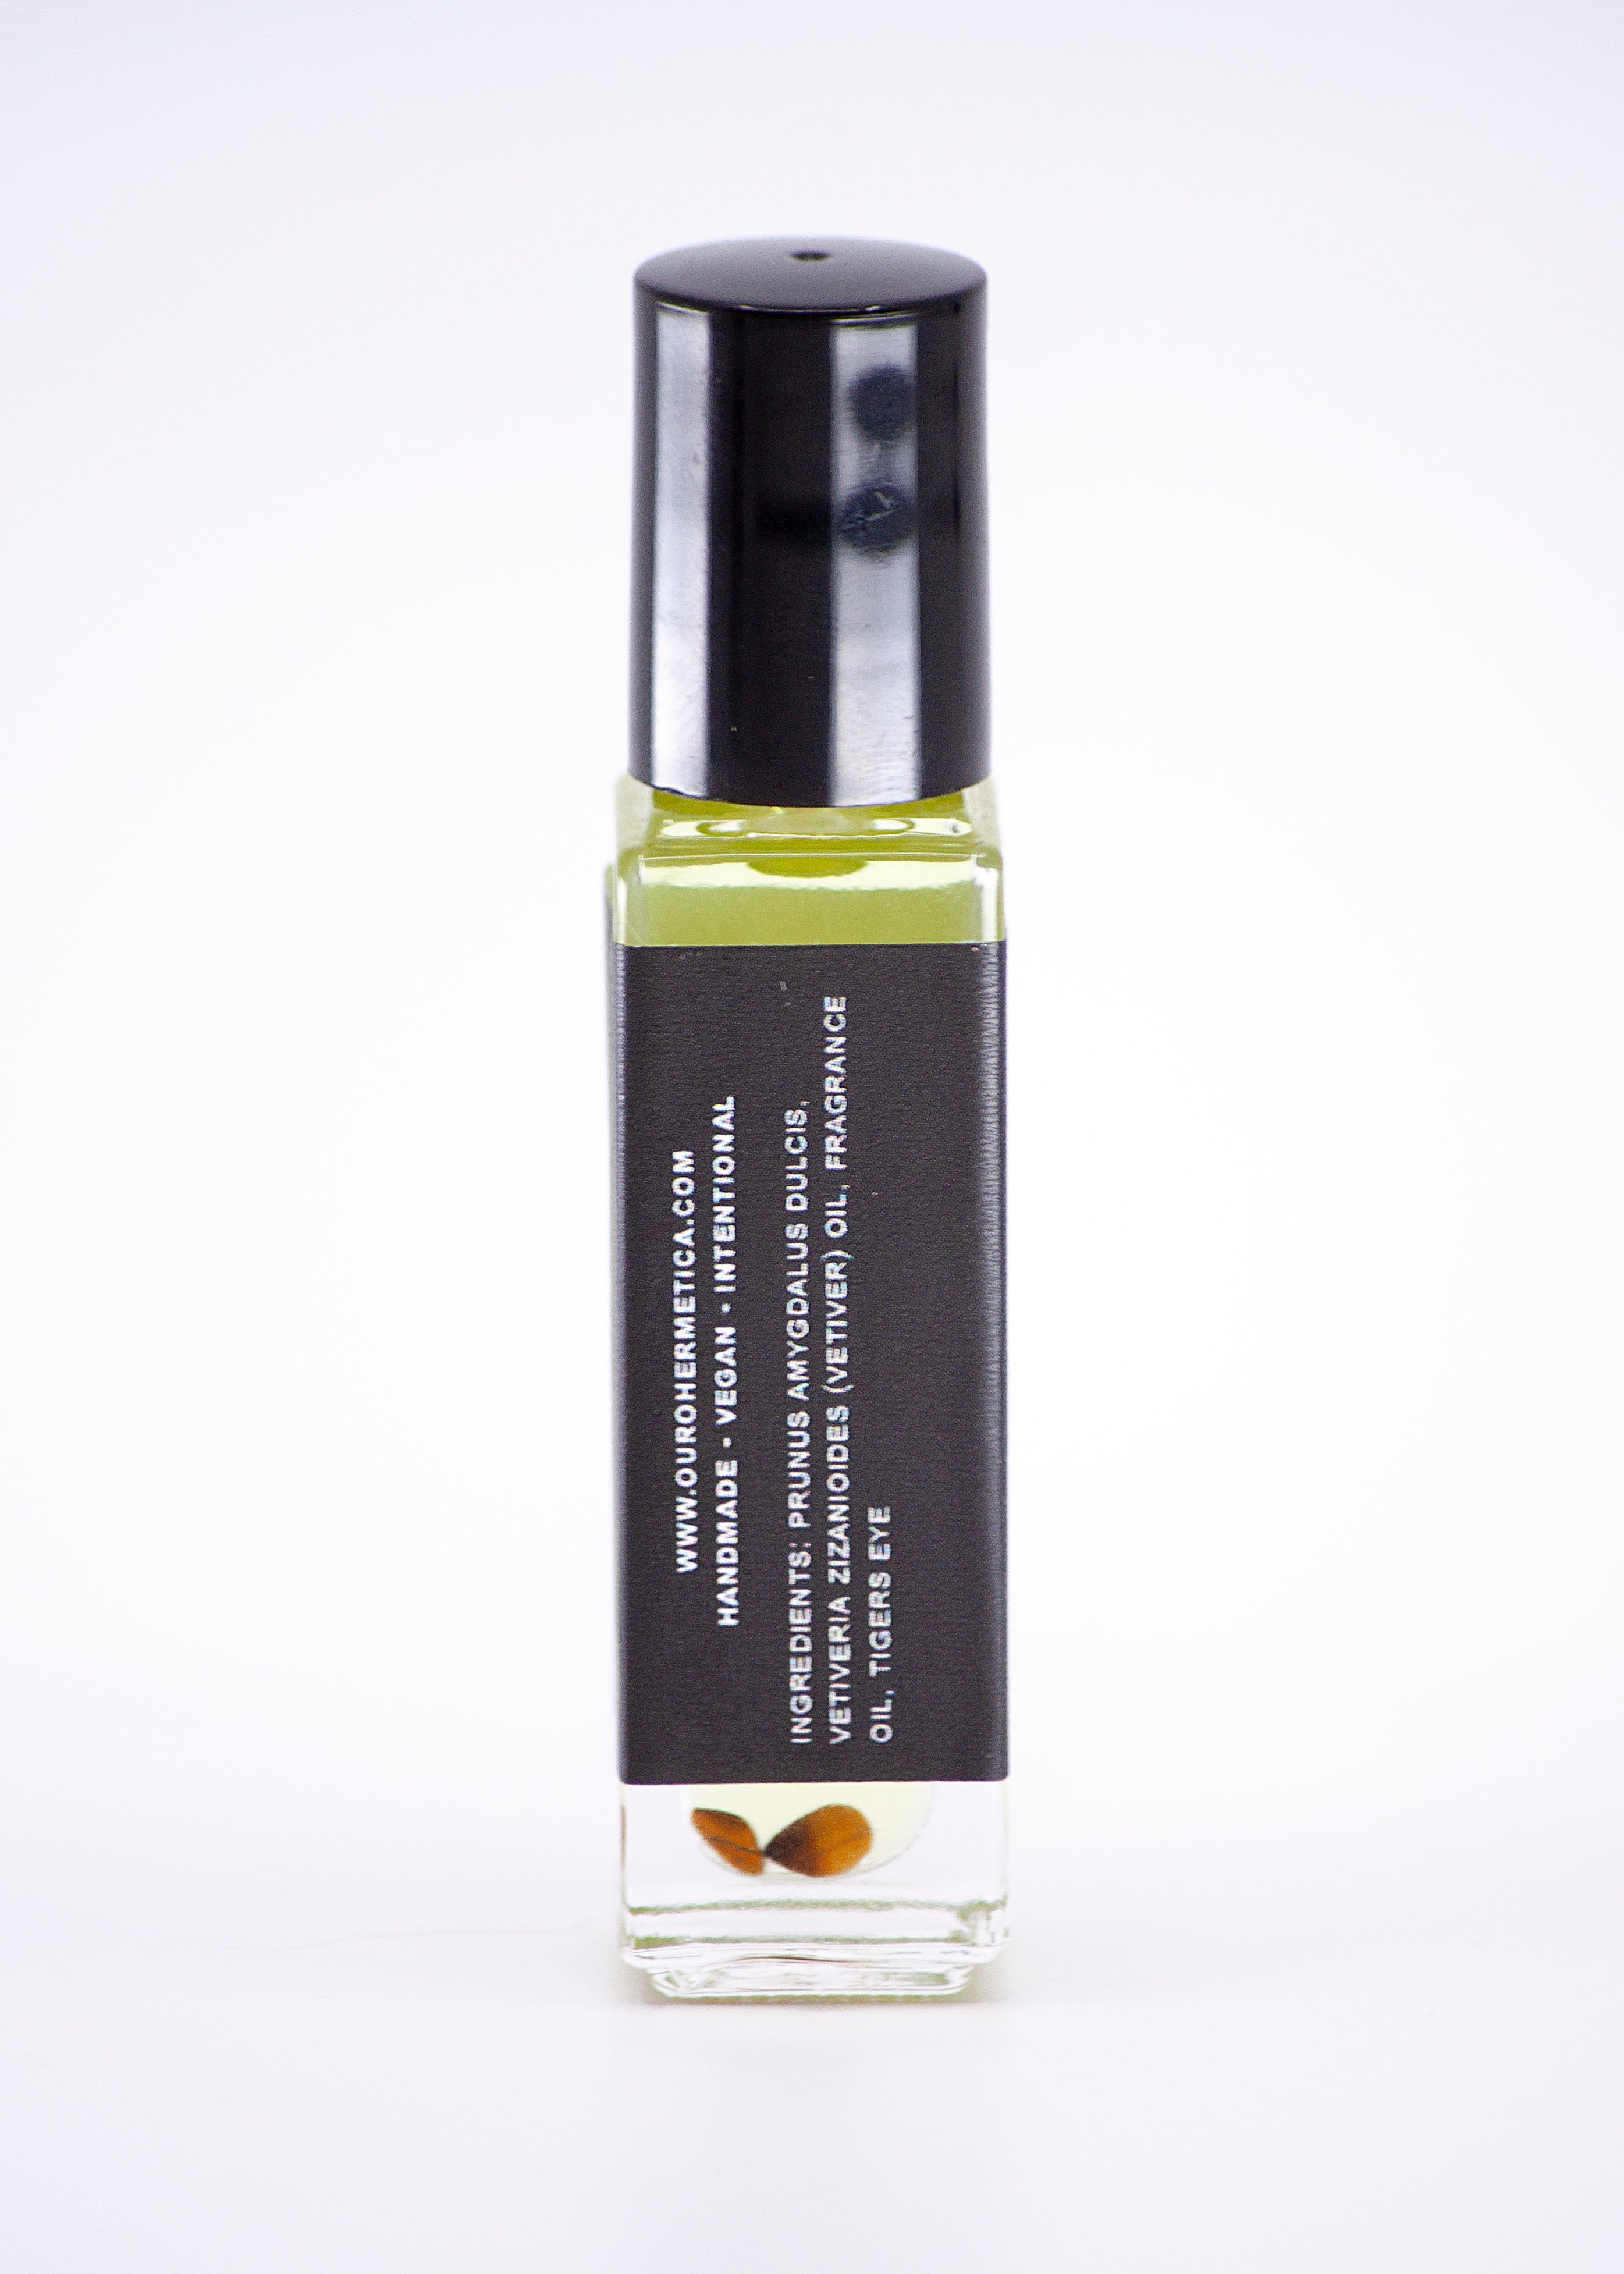 Thoth Roll-on Perfume Oil with Tigers Eye